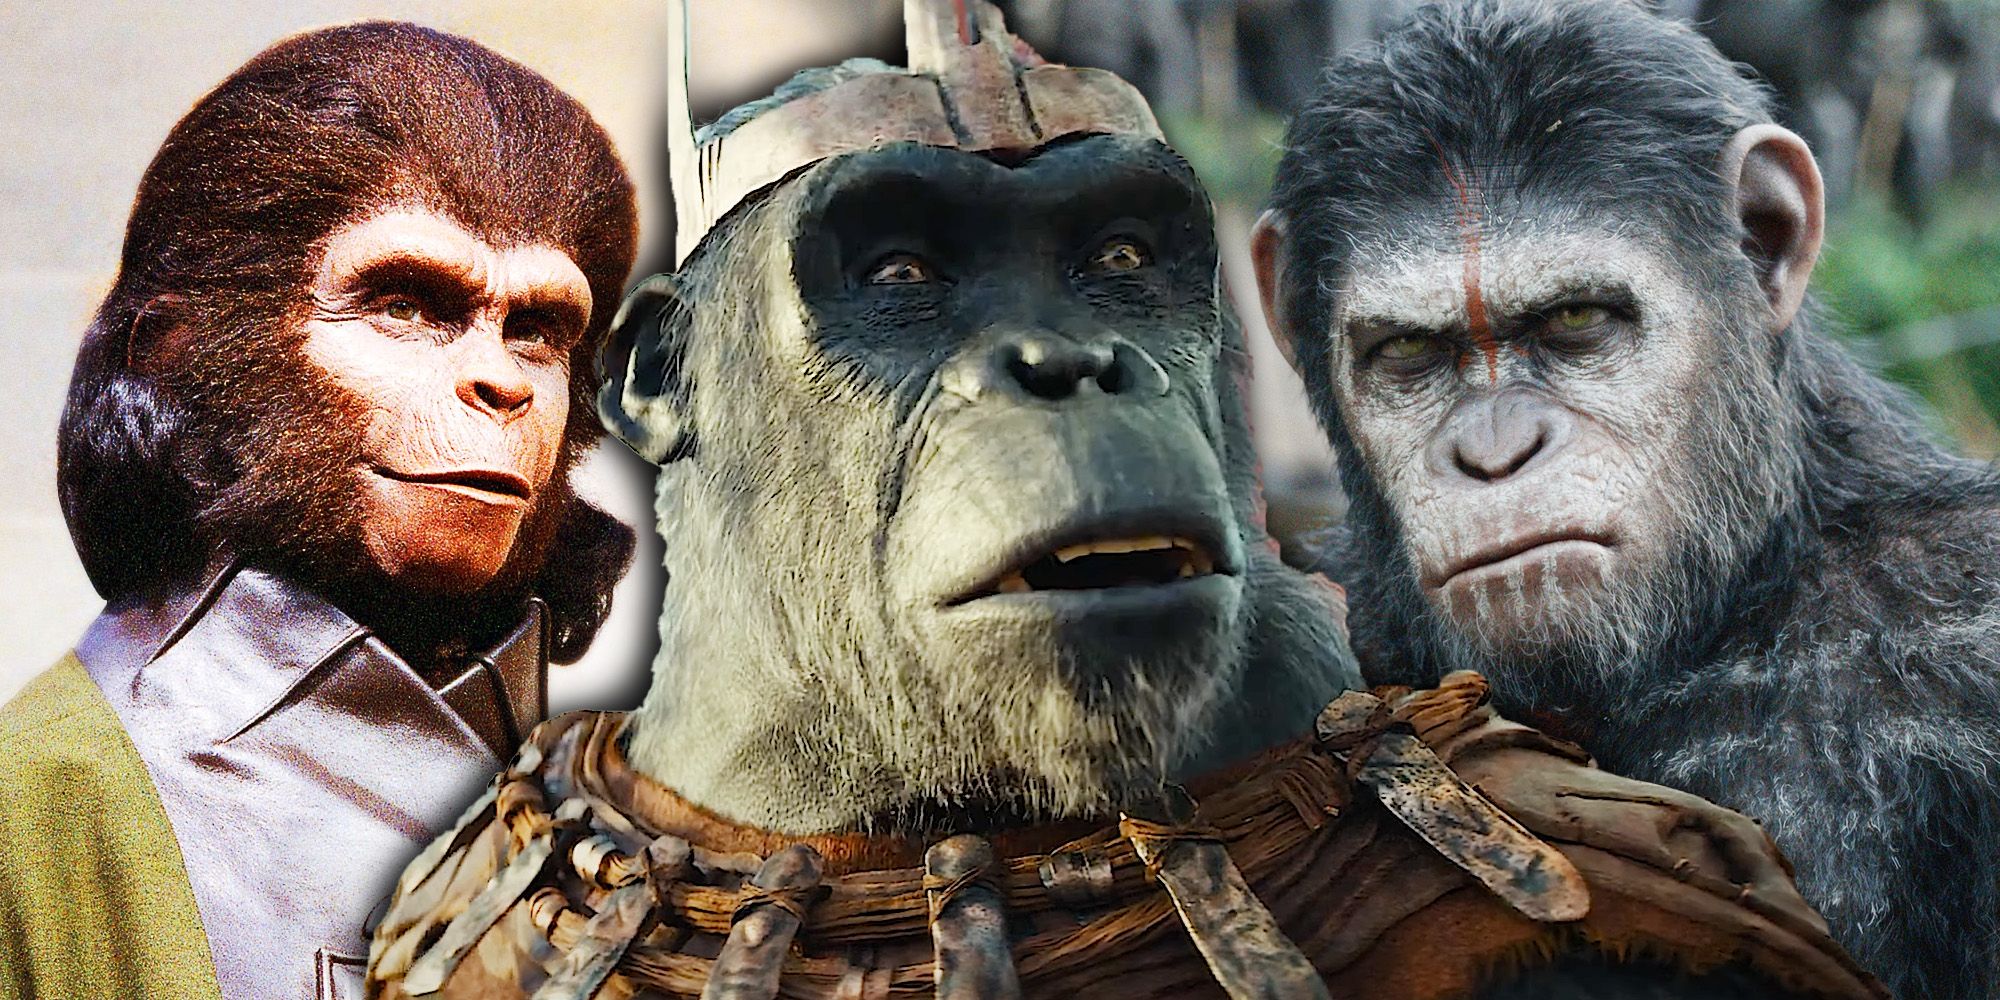 is-kingdom-planet-of-the-apes-a-sequel-or-reboot